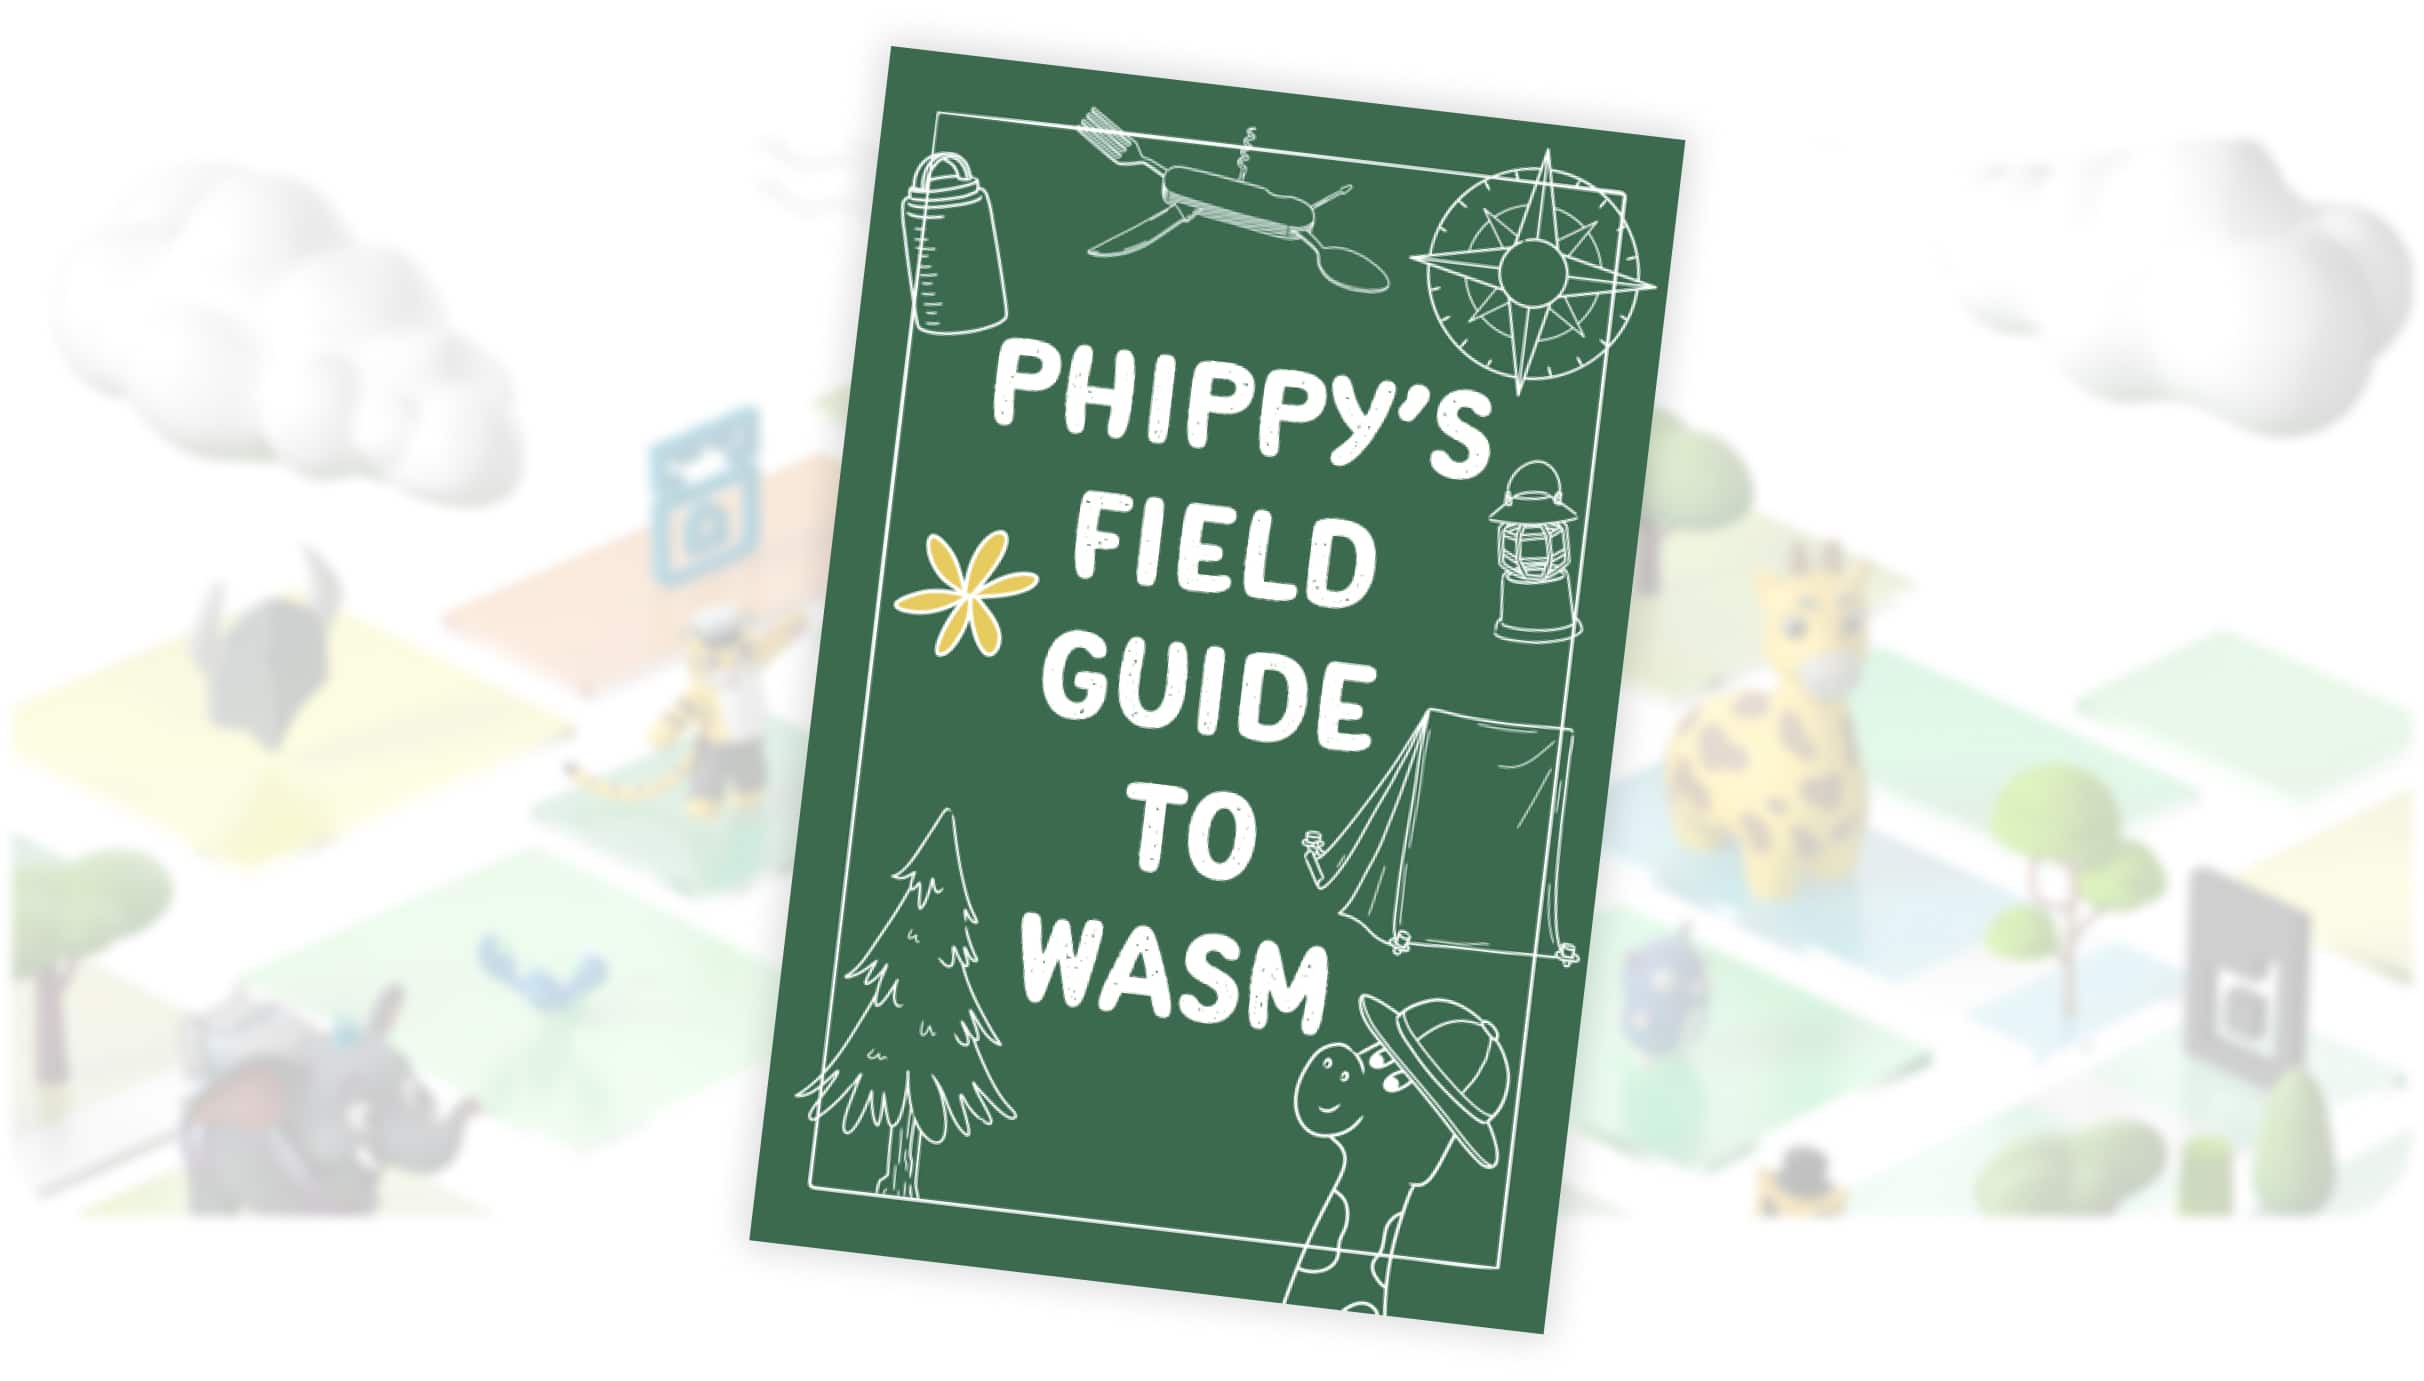 Phippys Field Guide to Wasm book cover